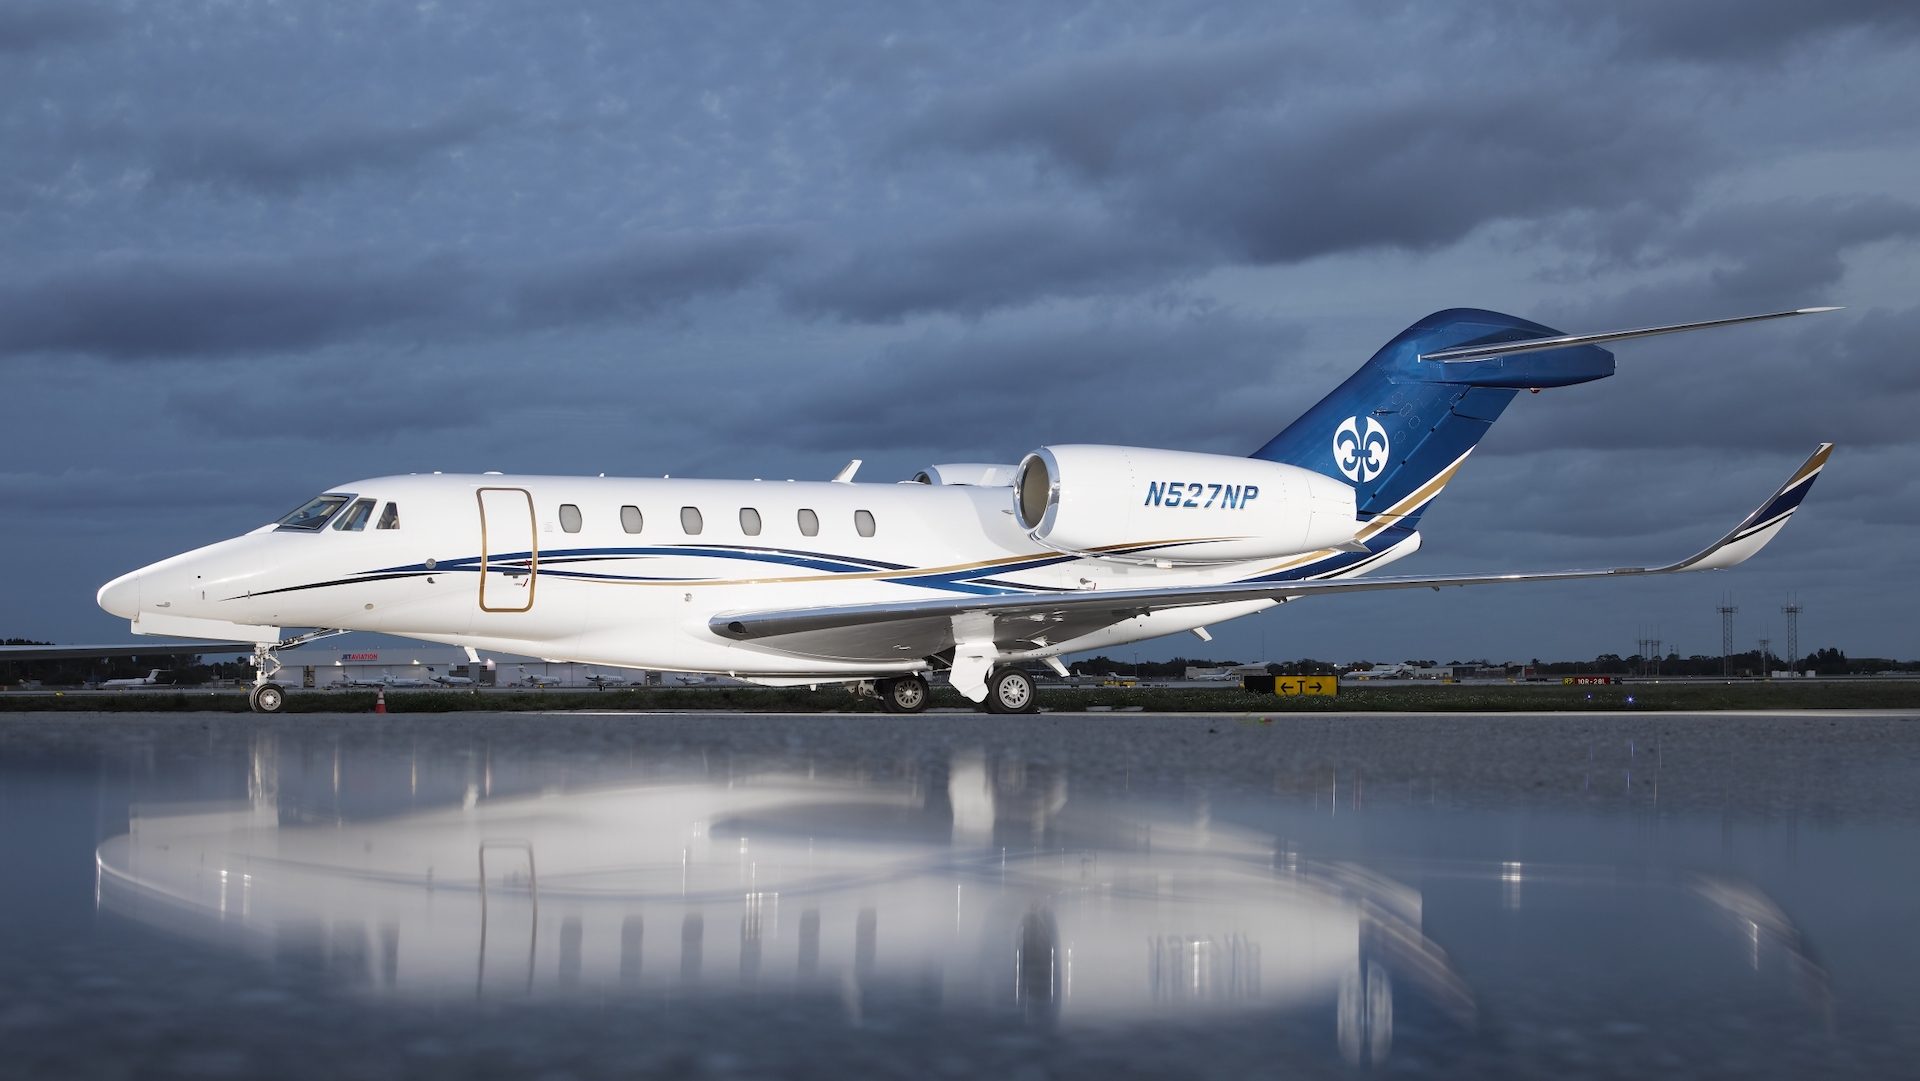 Alerion Citation X N527NP available for private charter by Alerion Aviation.